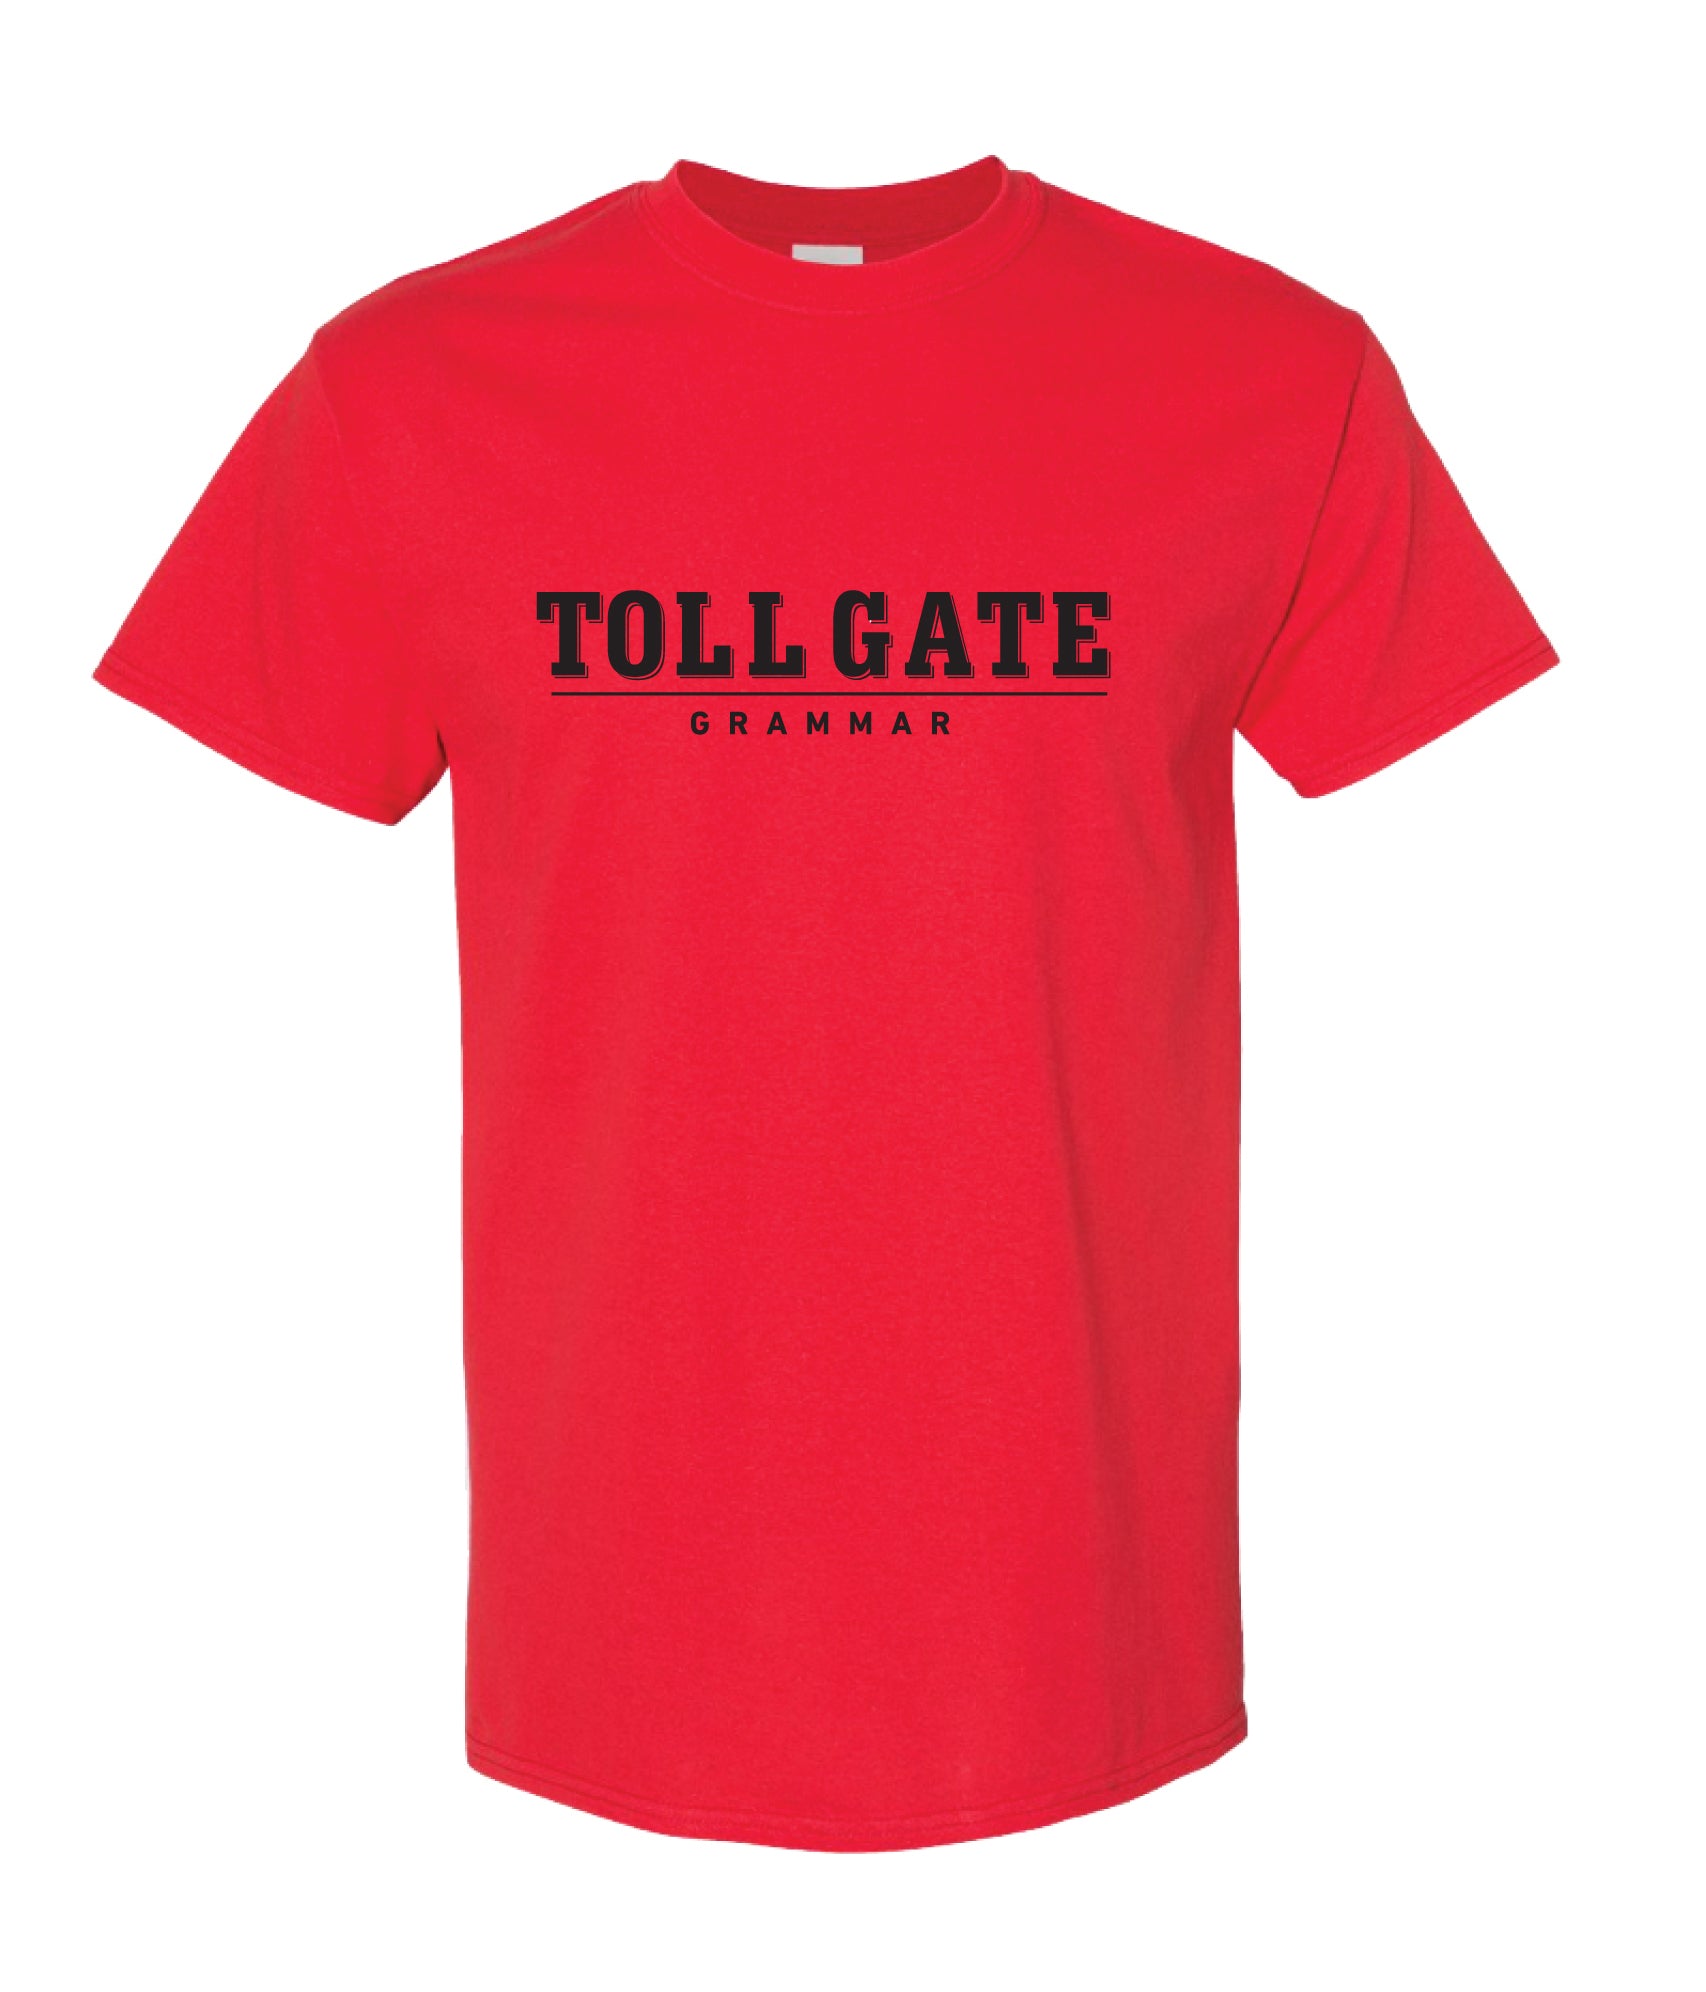 Toll Gate Red T-Shirt - Adult Unisex and Youth